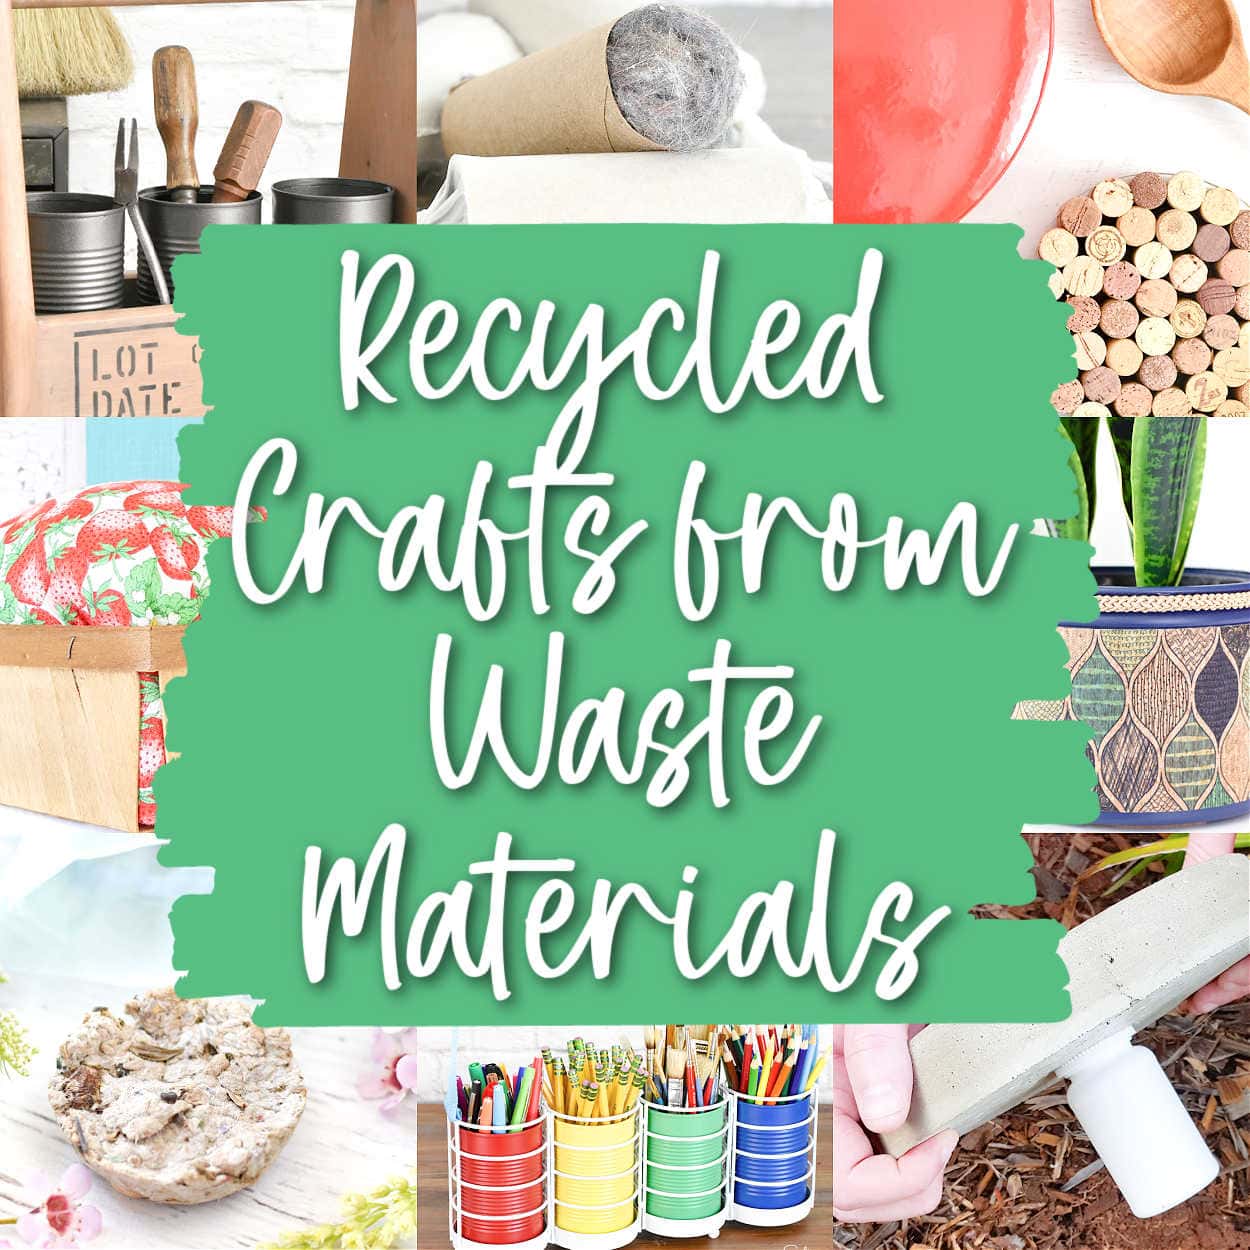 50+ Recycled Crafts from Your Trash Can and Recycling Bin